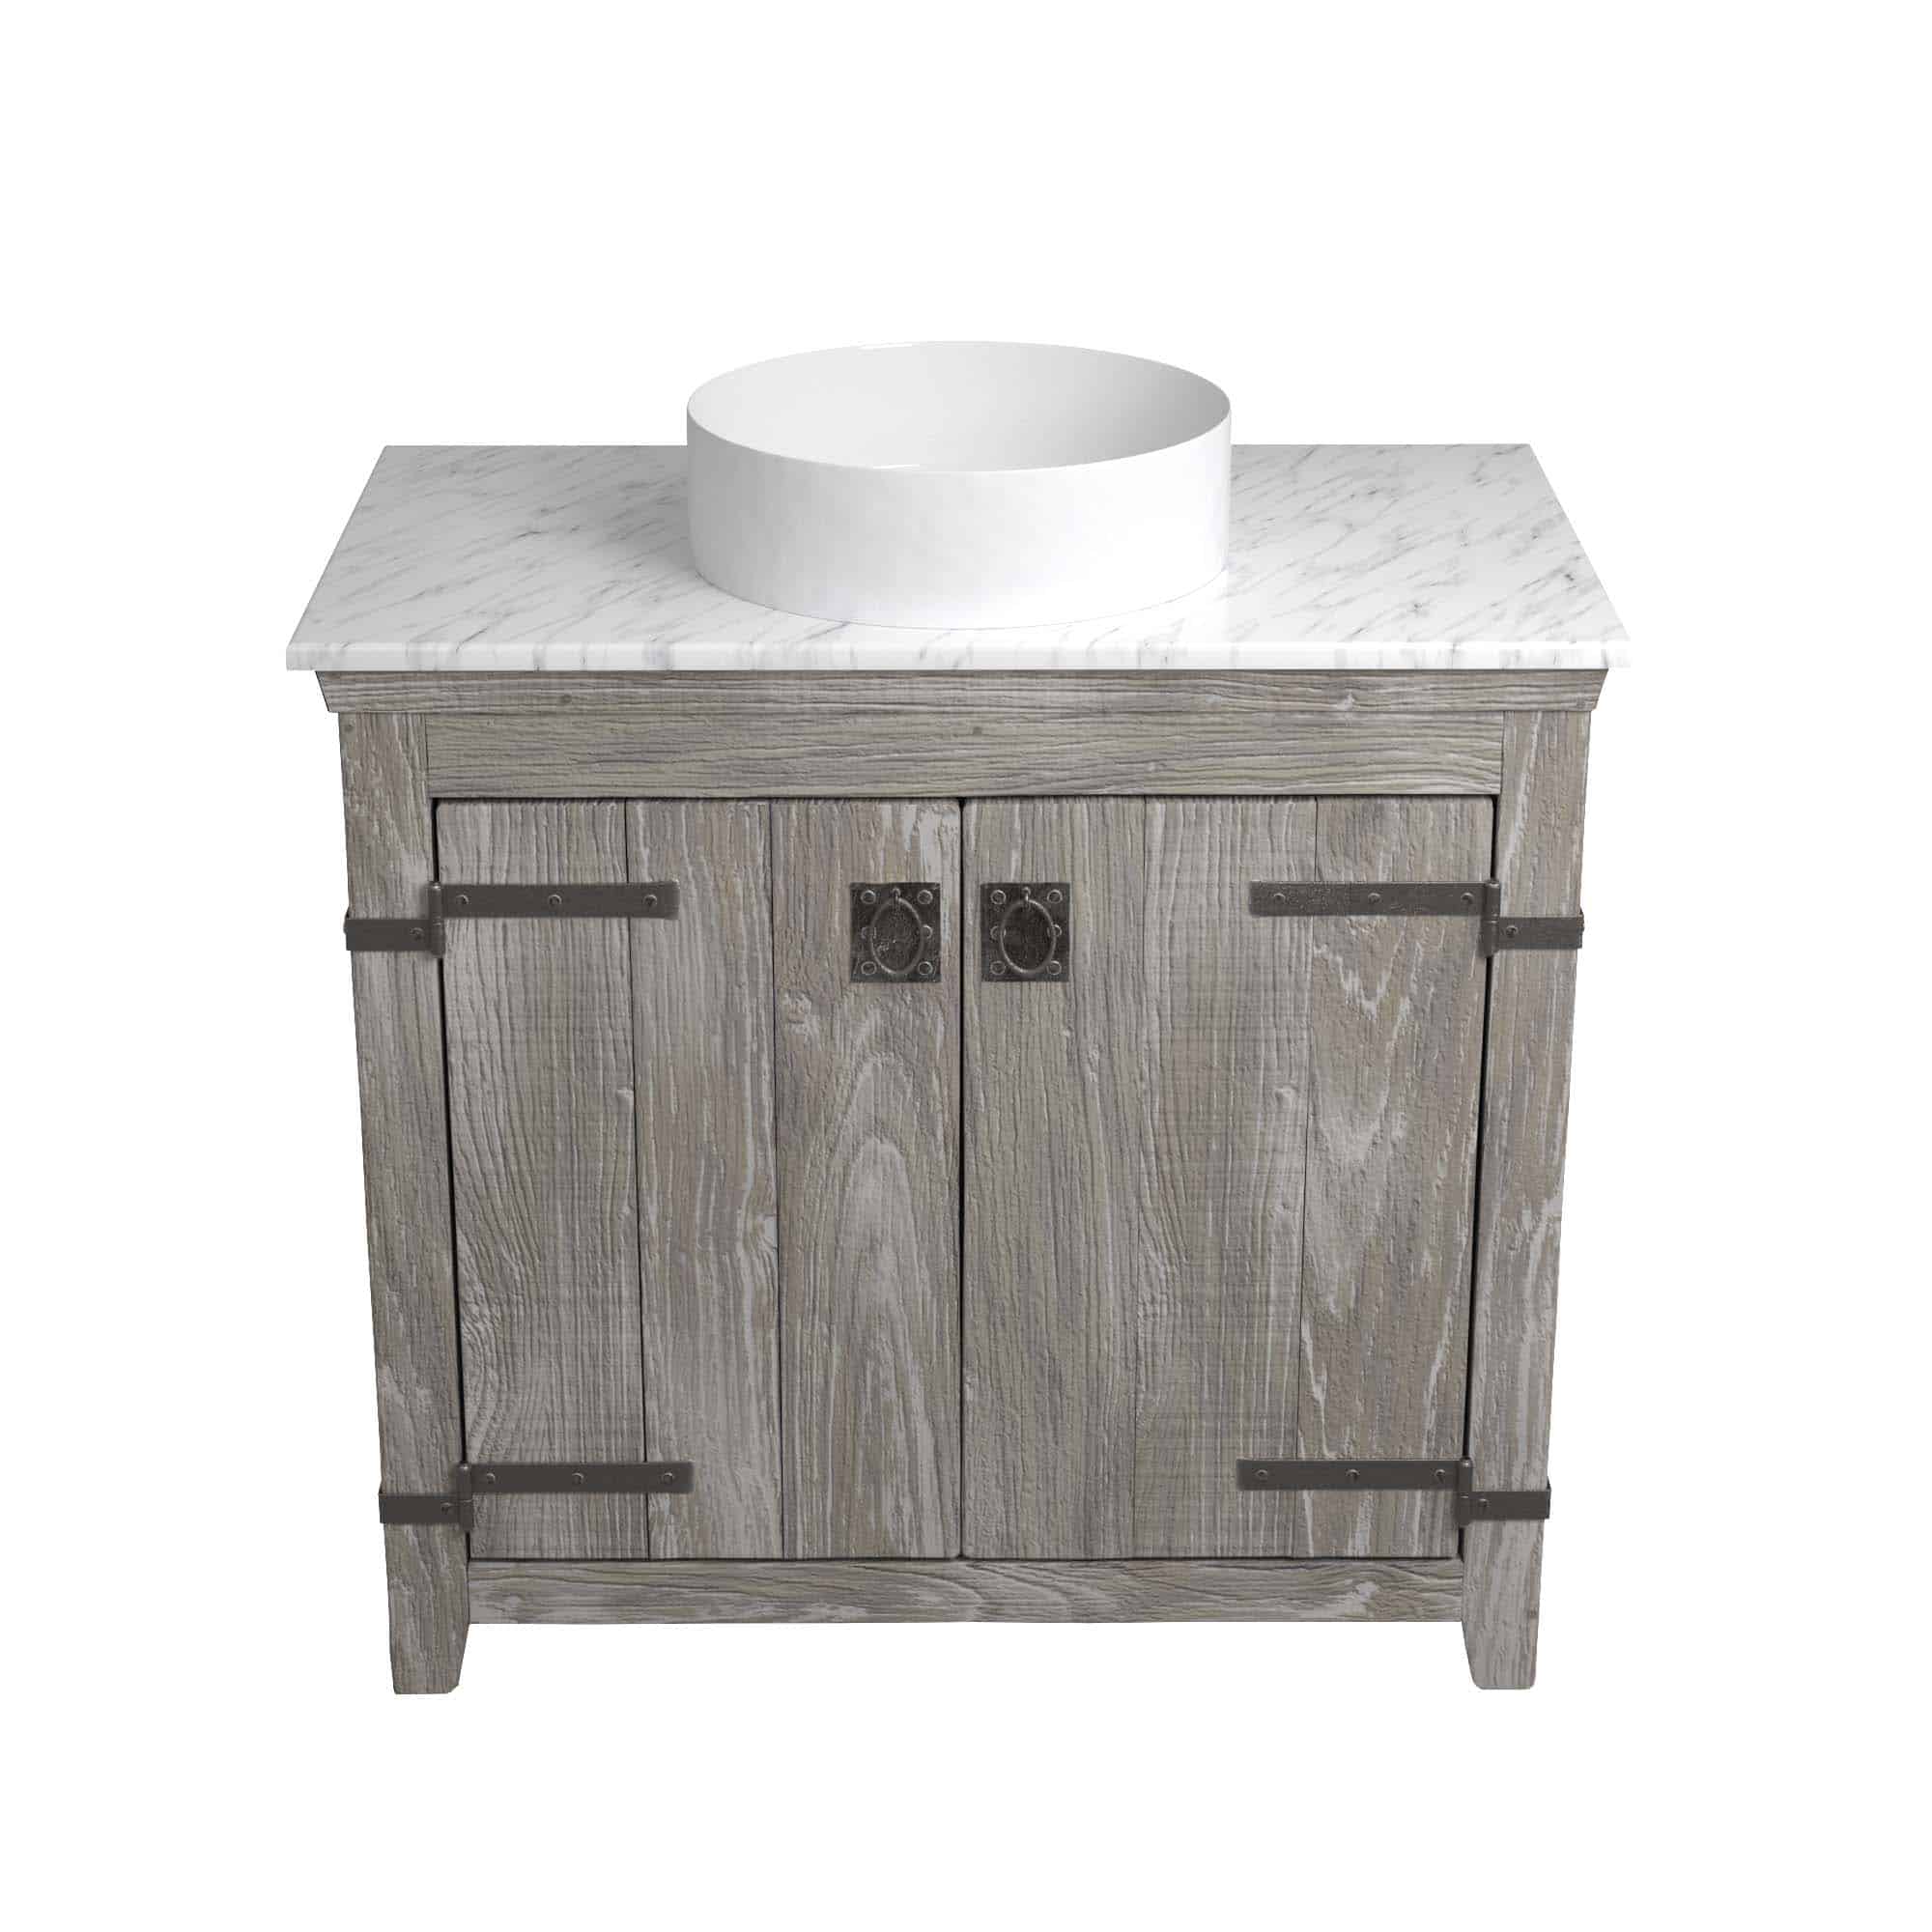 Native Trails 36" Americana Vanity in Driftwood with Carrara Marble Top and Positano in Bianco, No Faucet Hole, BND36-VB-CT-MG-056